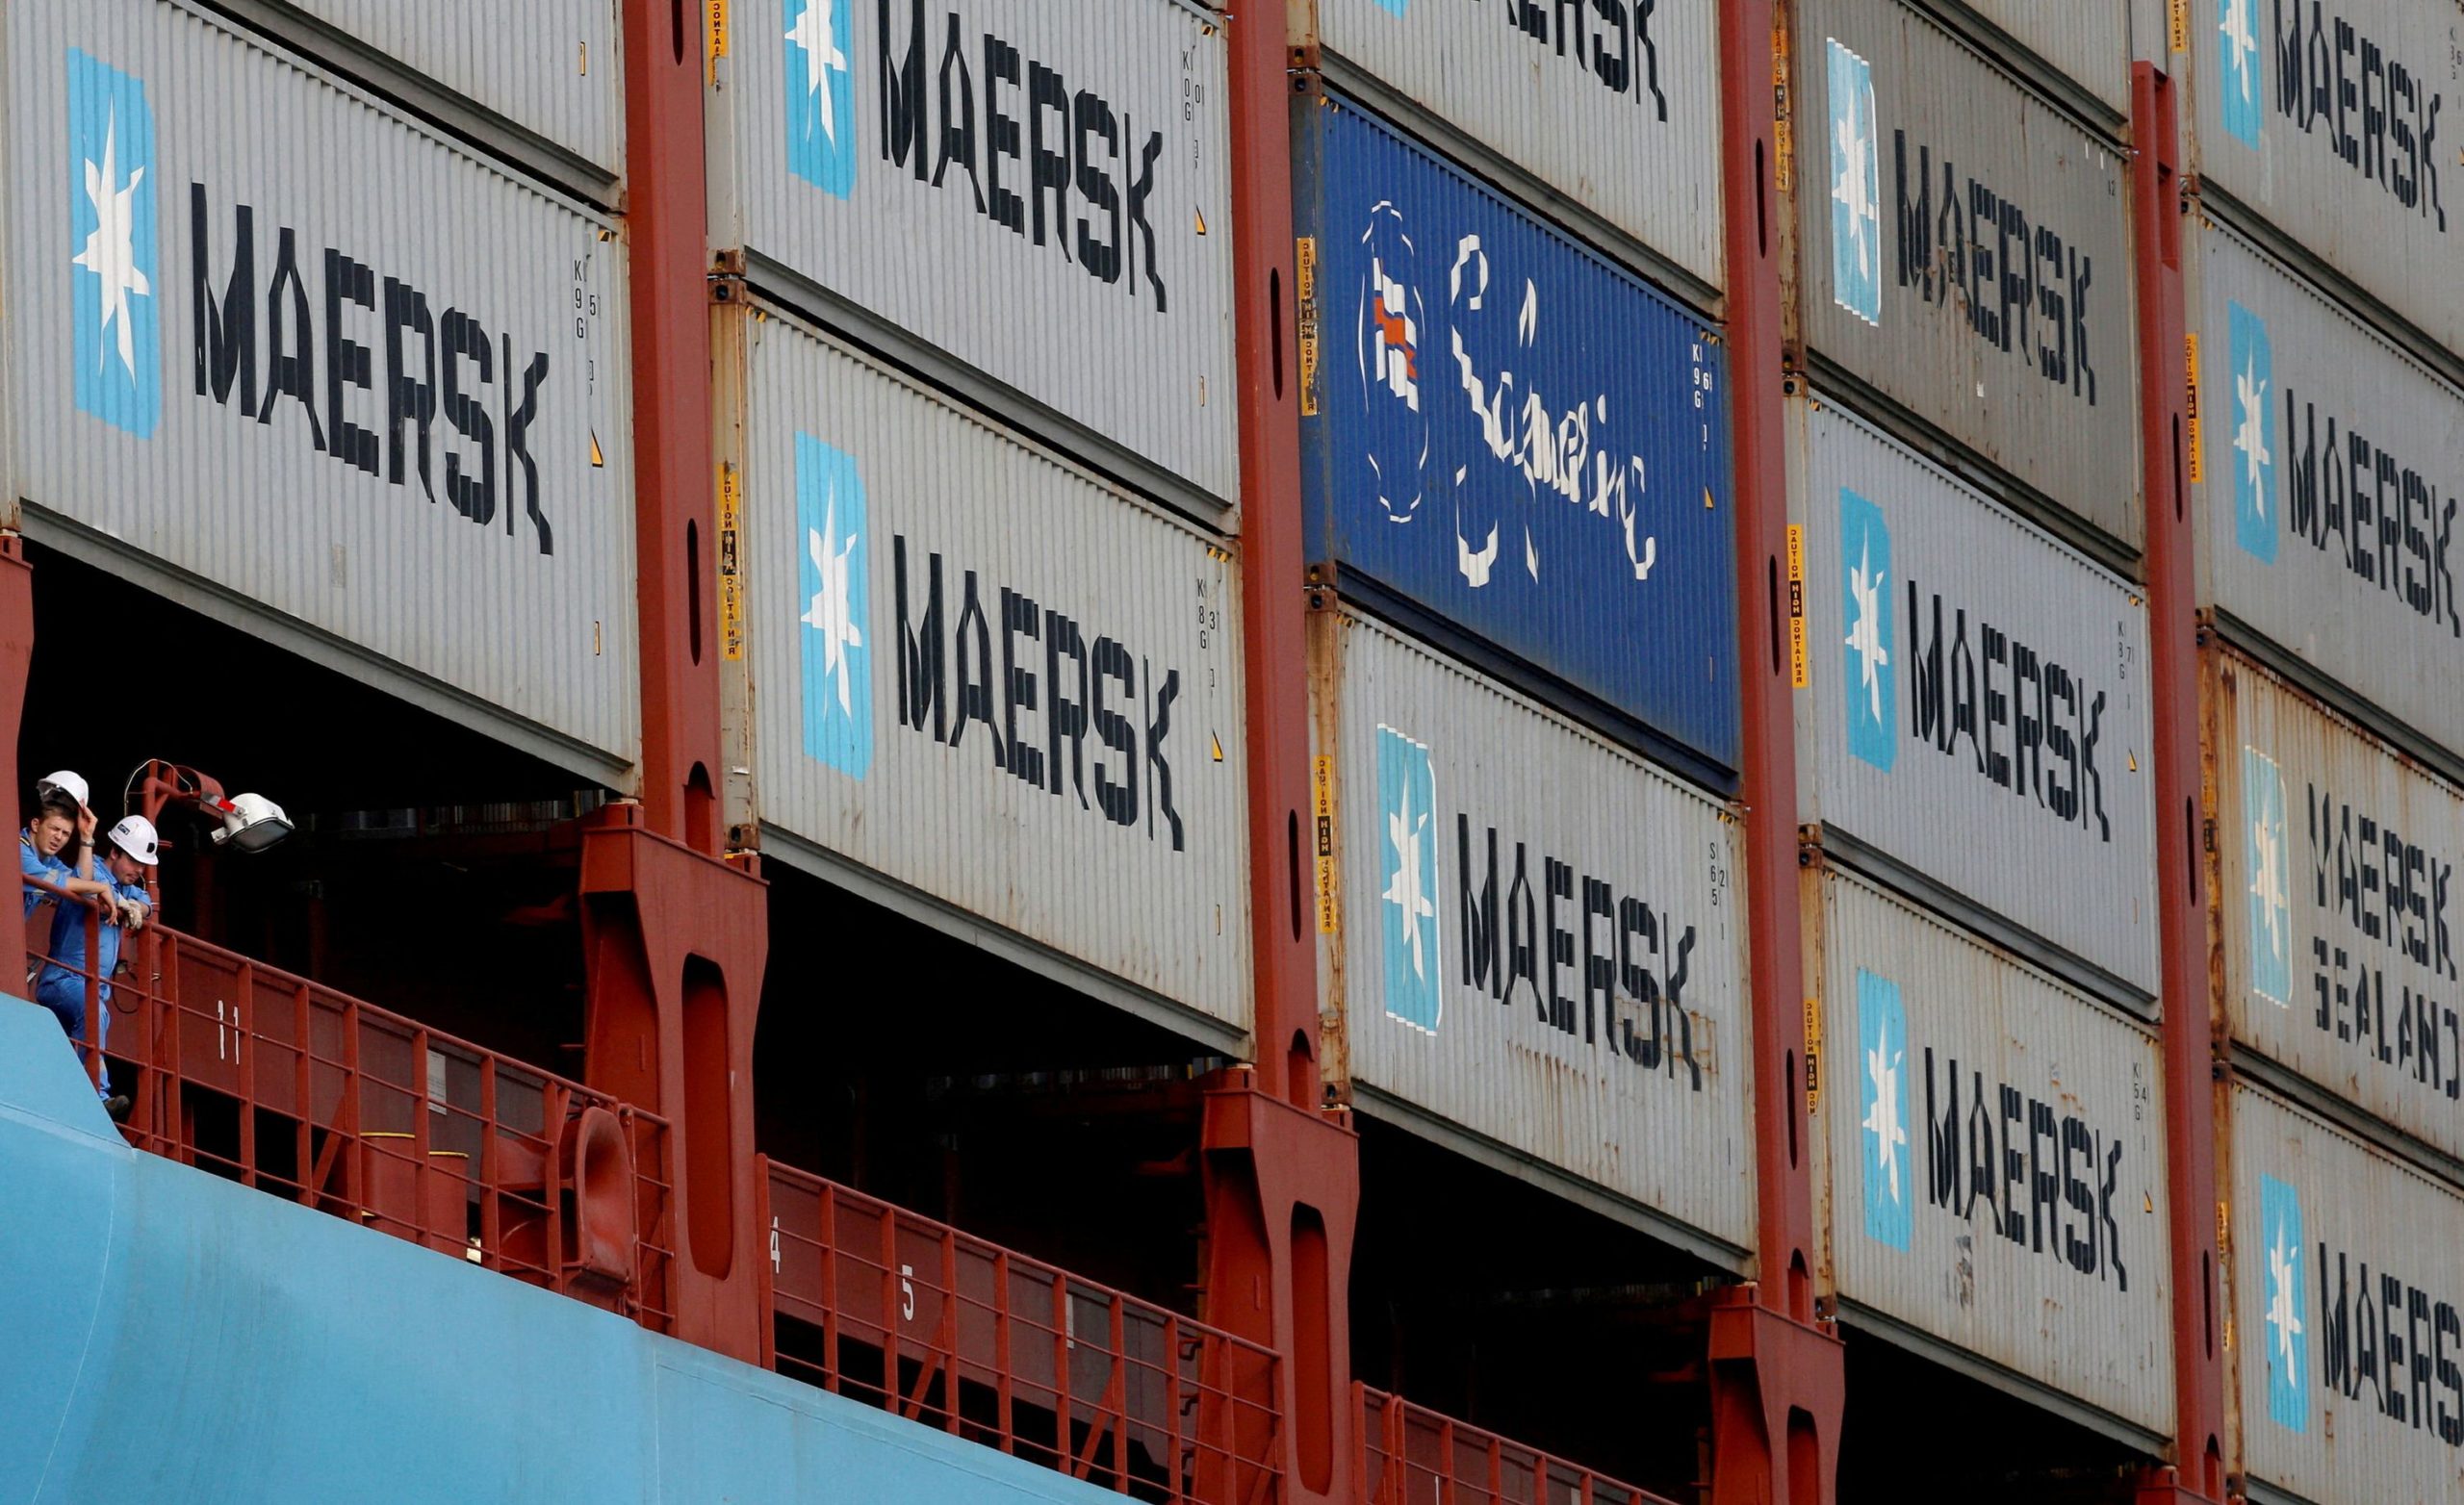 Maersk Warns of ‘Dark Clouds on the Horizon’ for Container Shipping